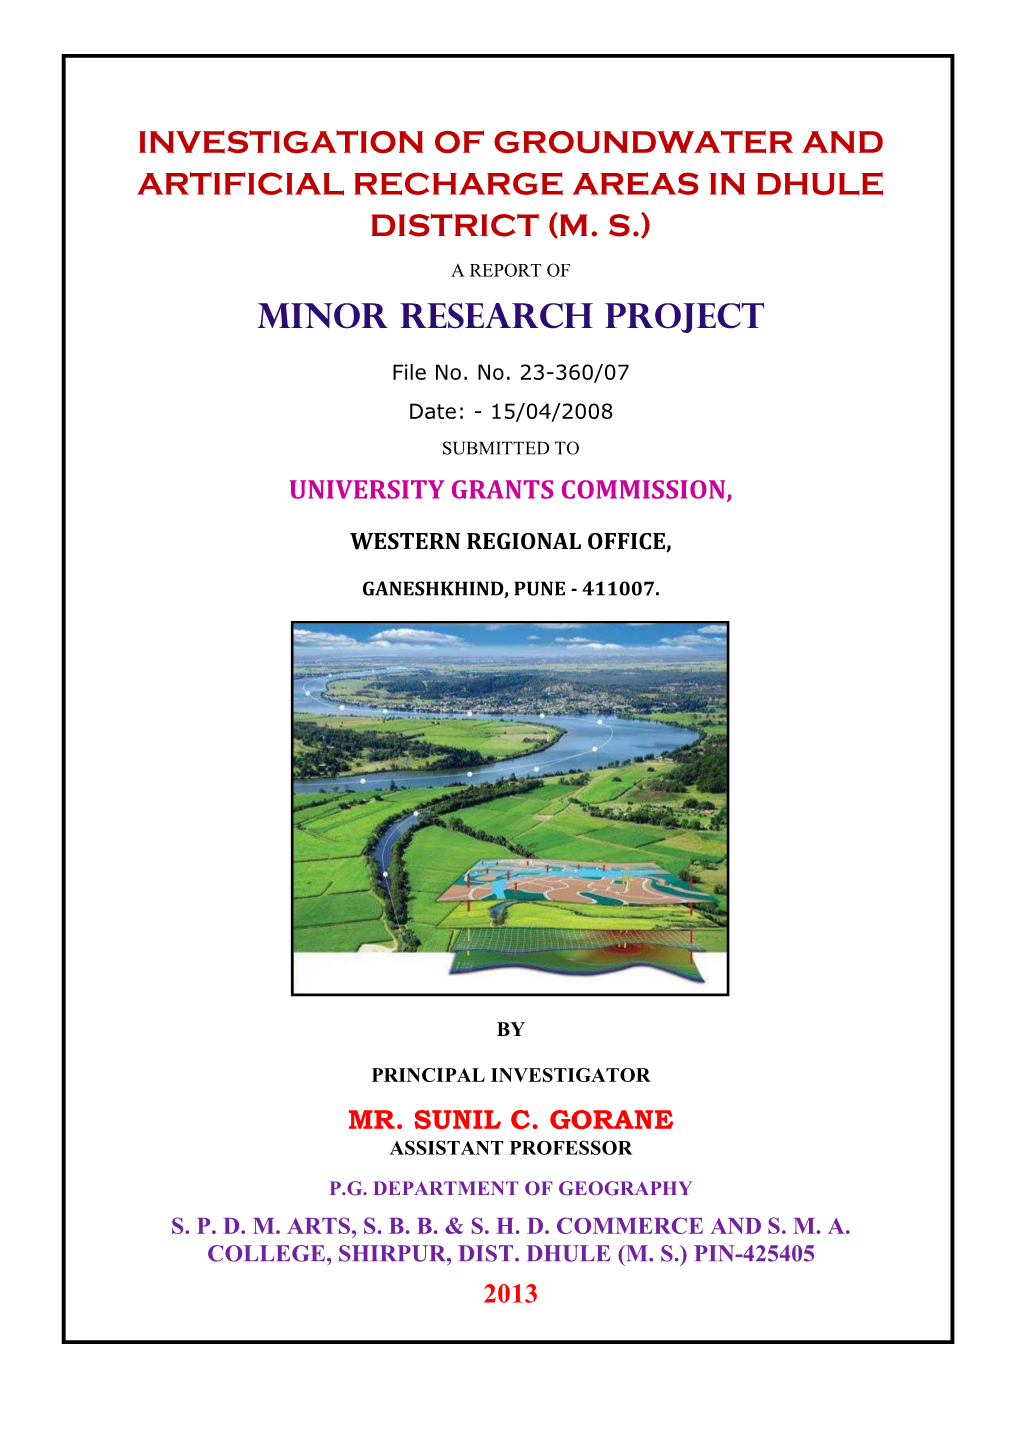 Investigation of Groundwater and Artificial Recharge Areas in Dhule District (M